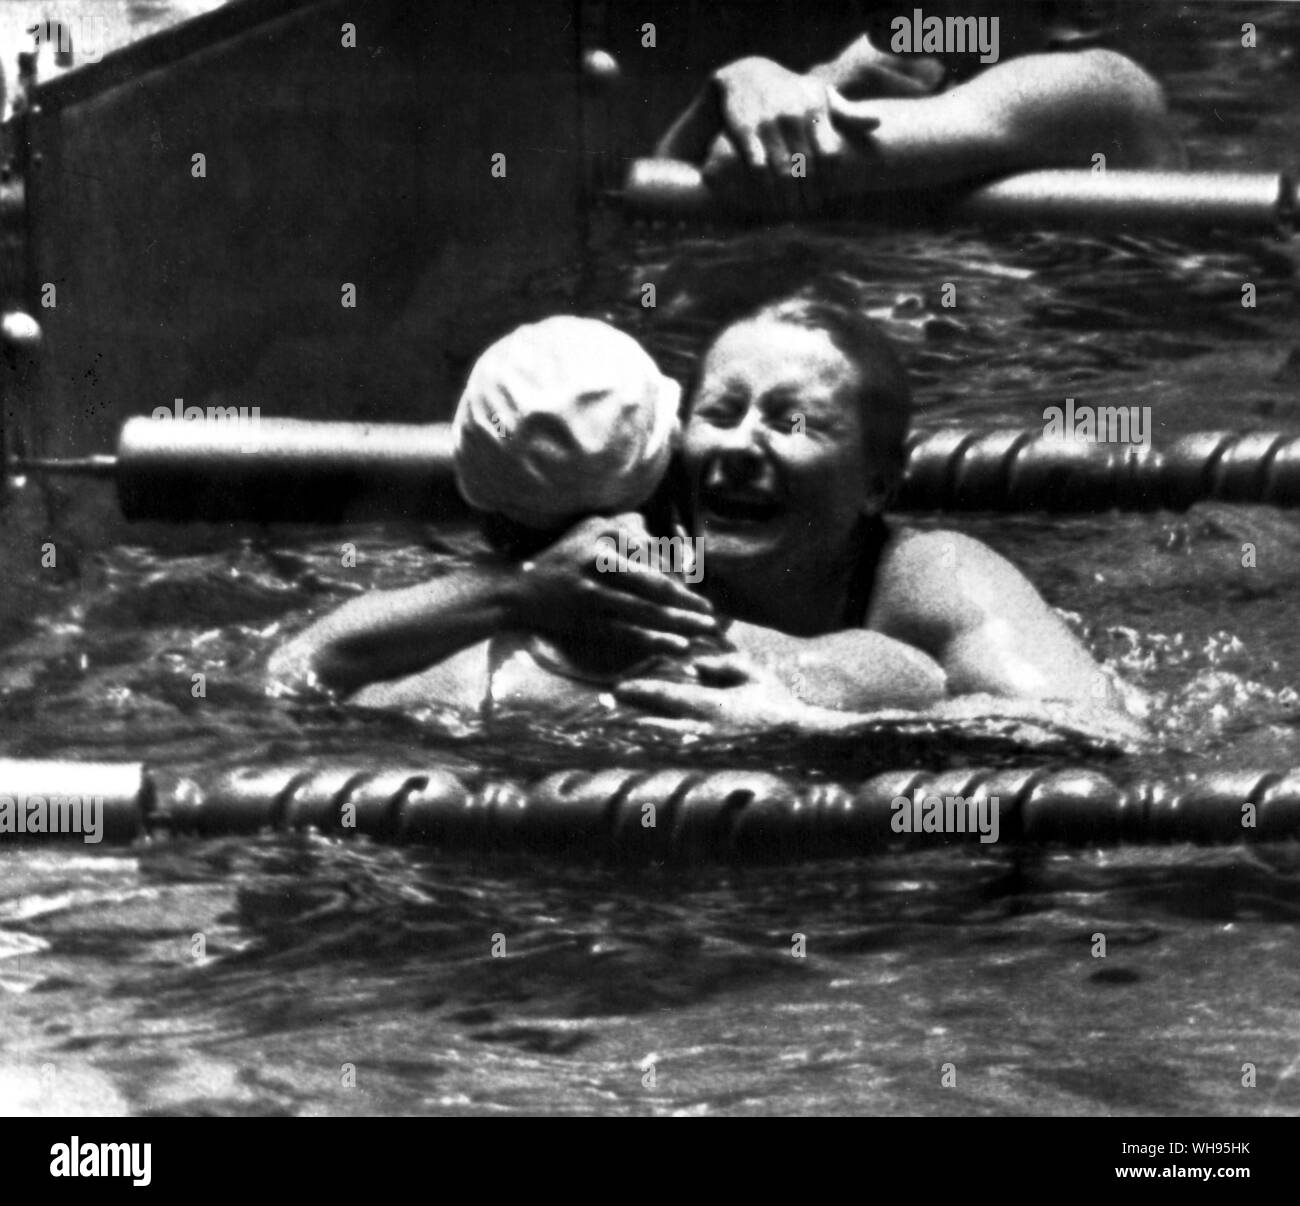 Japan, Tokyo Olympic Games, 1964: galina Prozumenschikova (USSR) facing the camera, hugs a competitor after she won the women's 200m breaststroke final in a new Olympic record time of 2:64.4 . Stock Photo